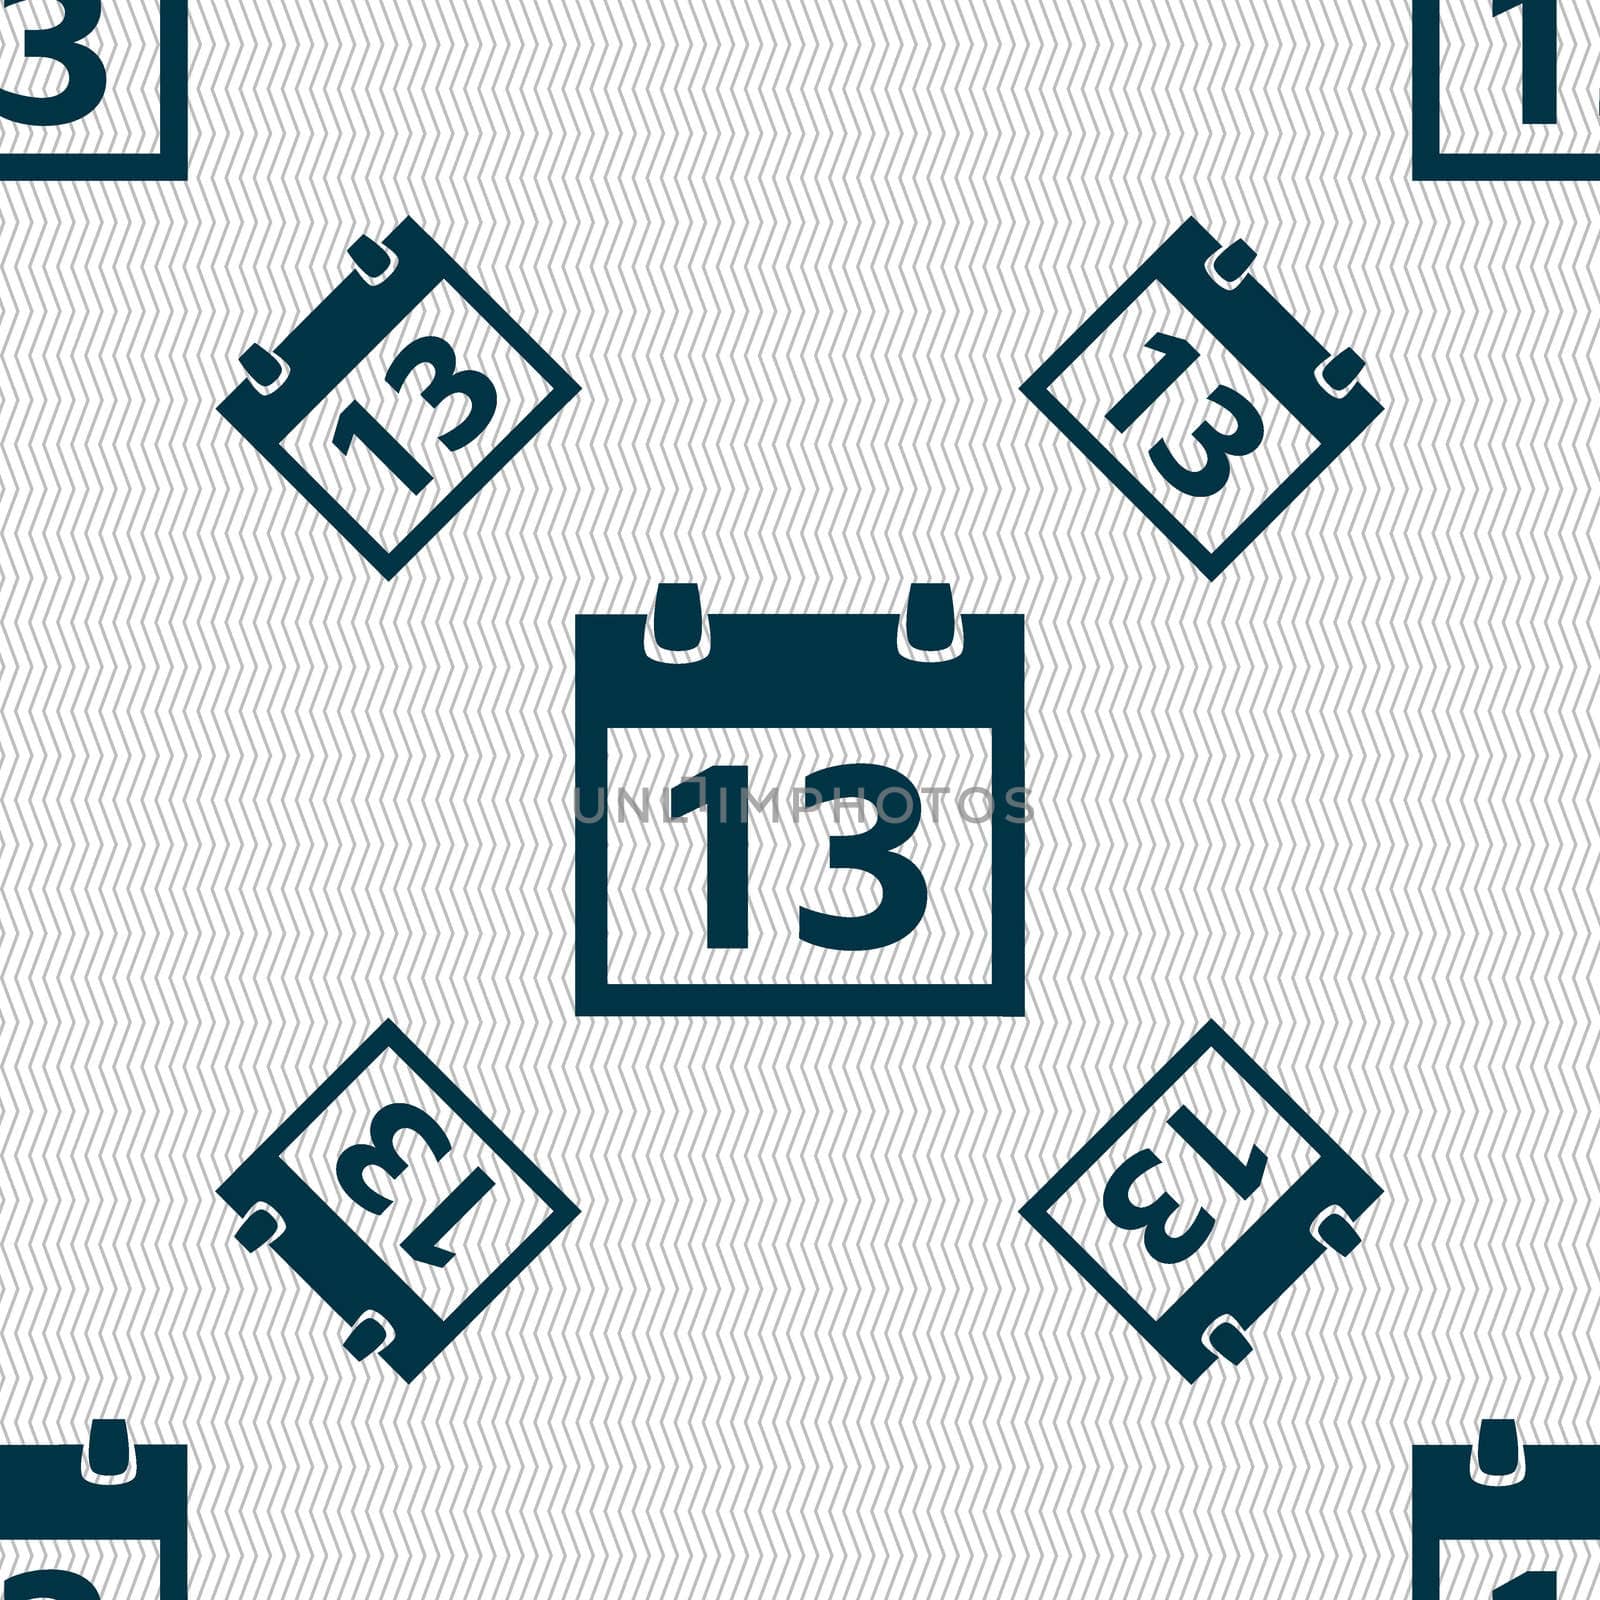 Calendar sign icon. days month symbol. Date button. Seamless pattern with geometric texture. illustration